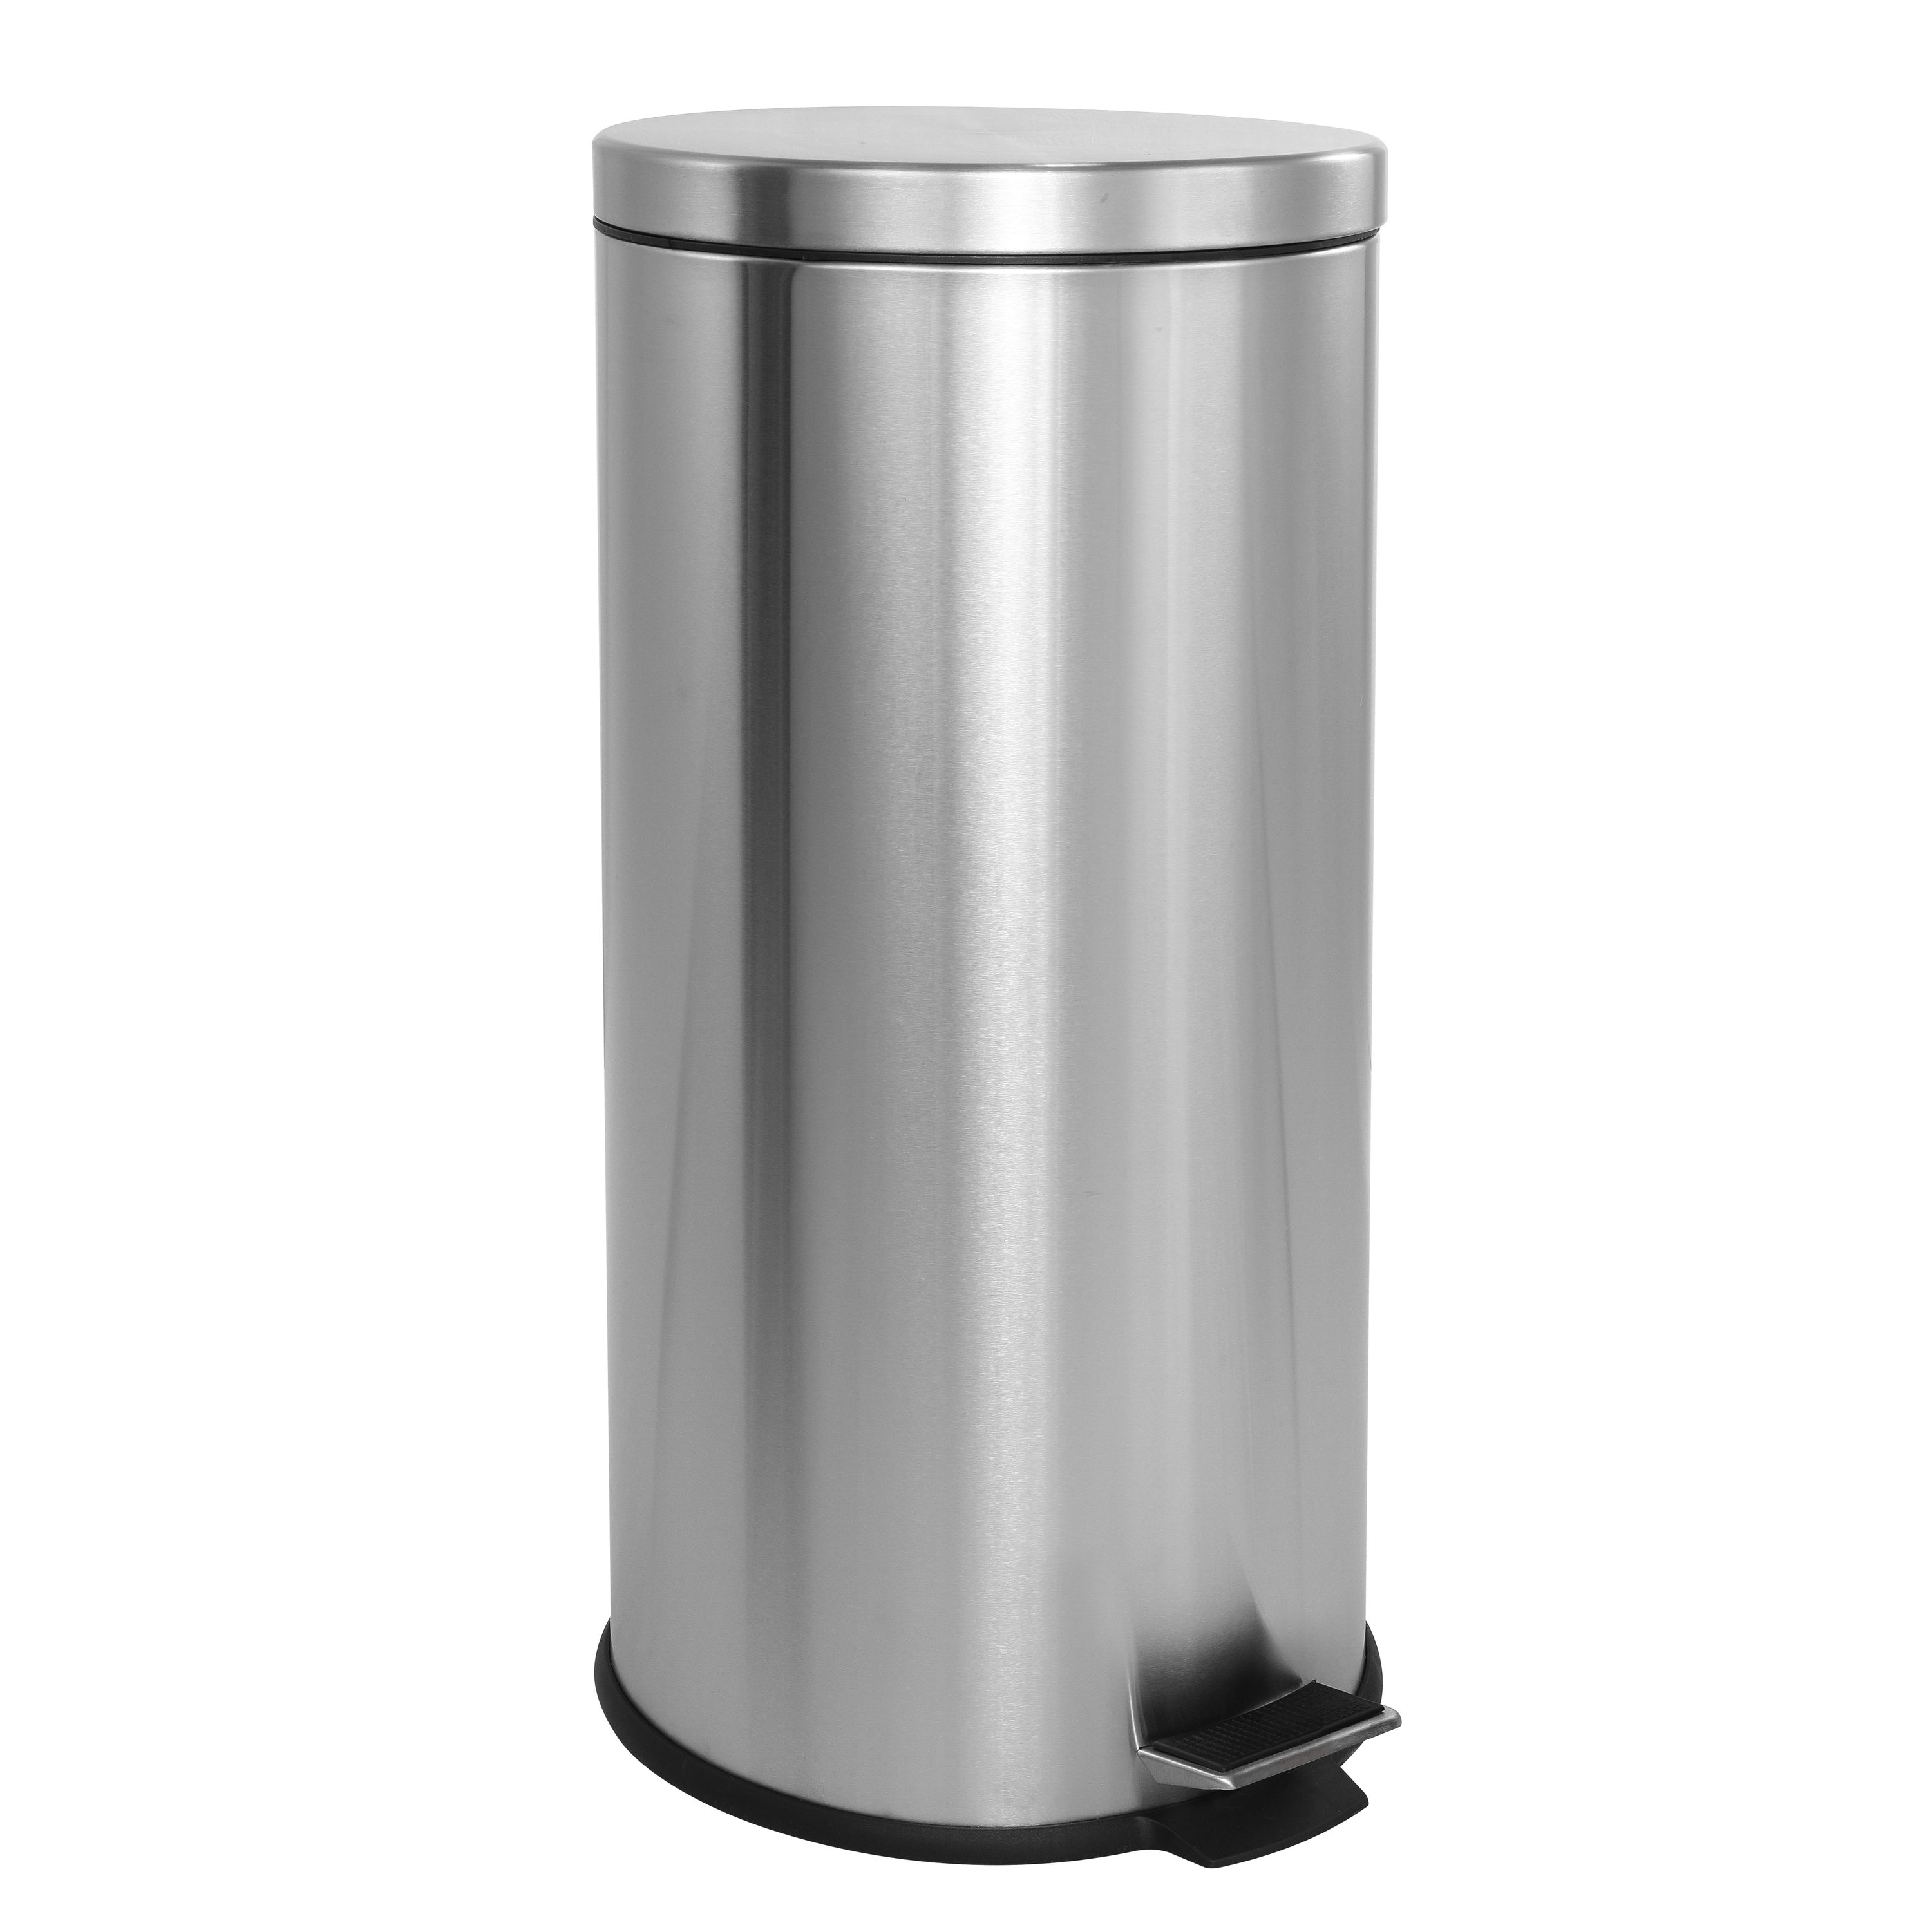 happimess 7.9-Gallons White Steel Kitchen Trash Can with Lid Outdoor in the  Trash Cans department at